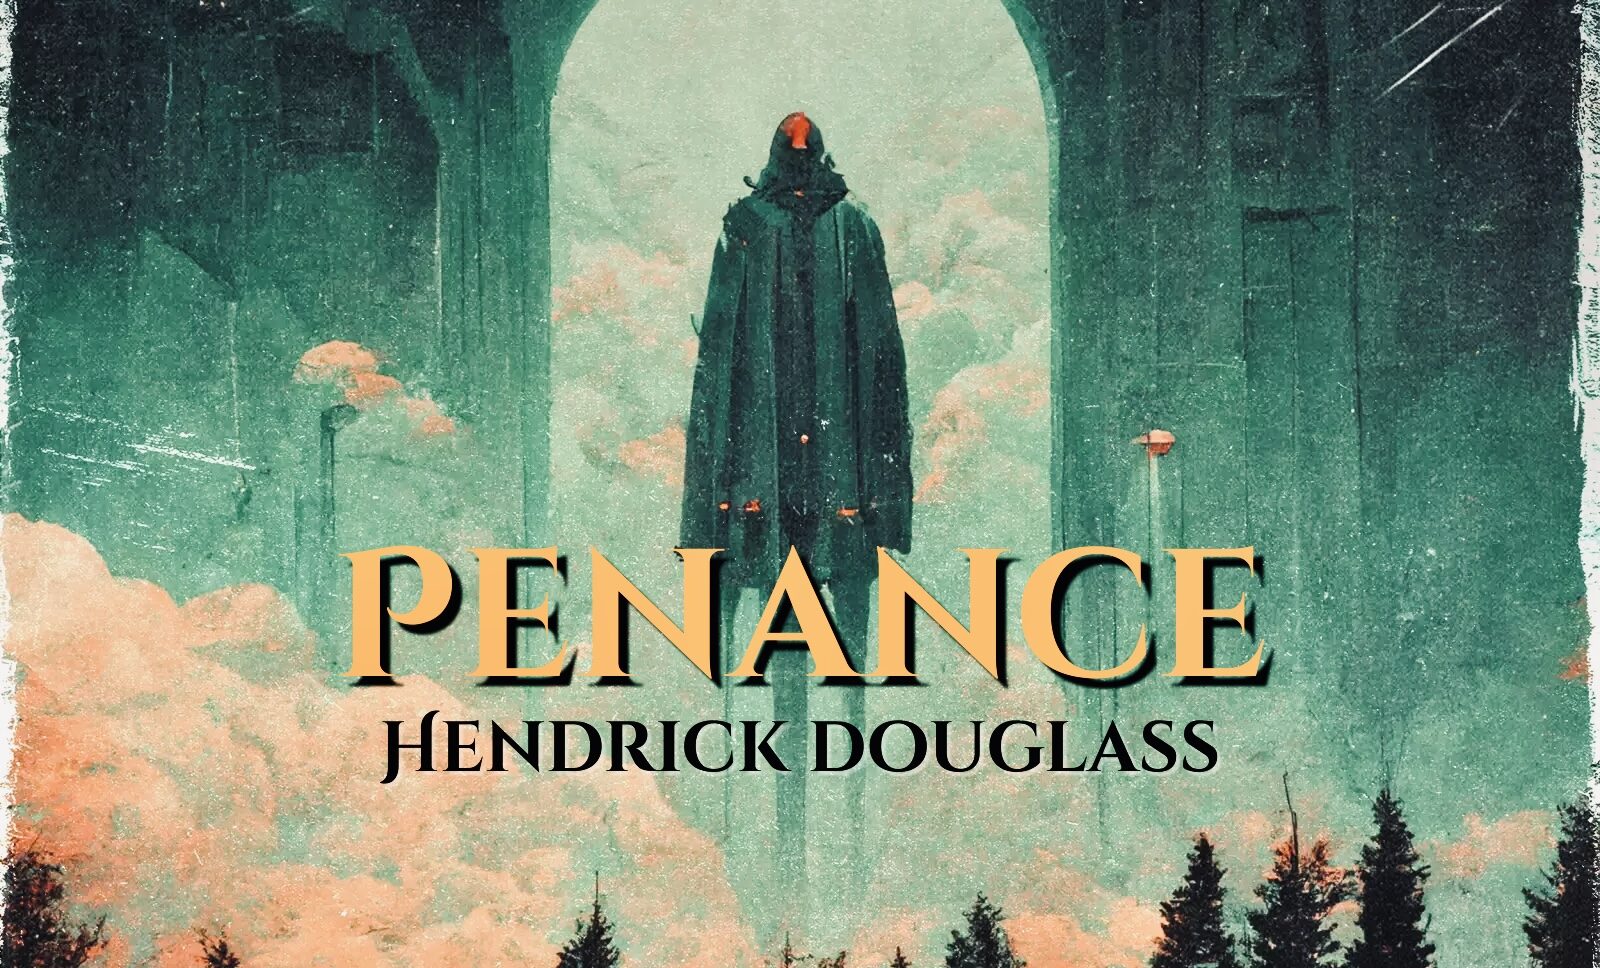 Hendrick Douglass Showcases his Passion with Penance